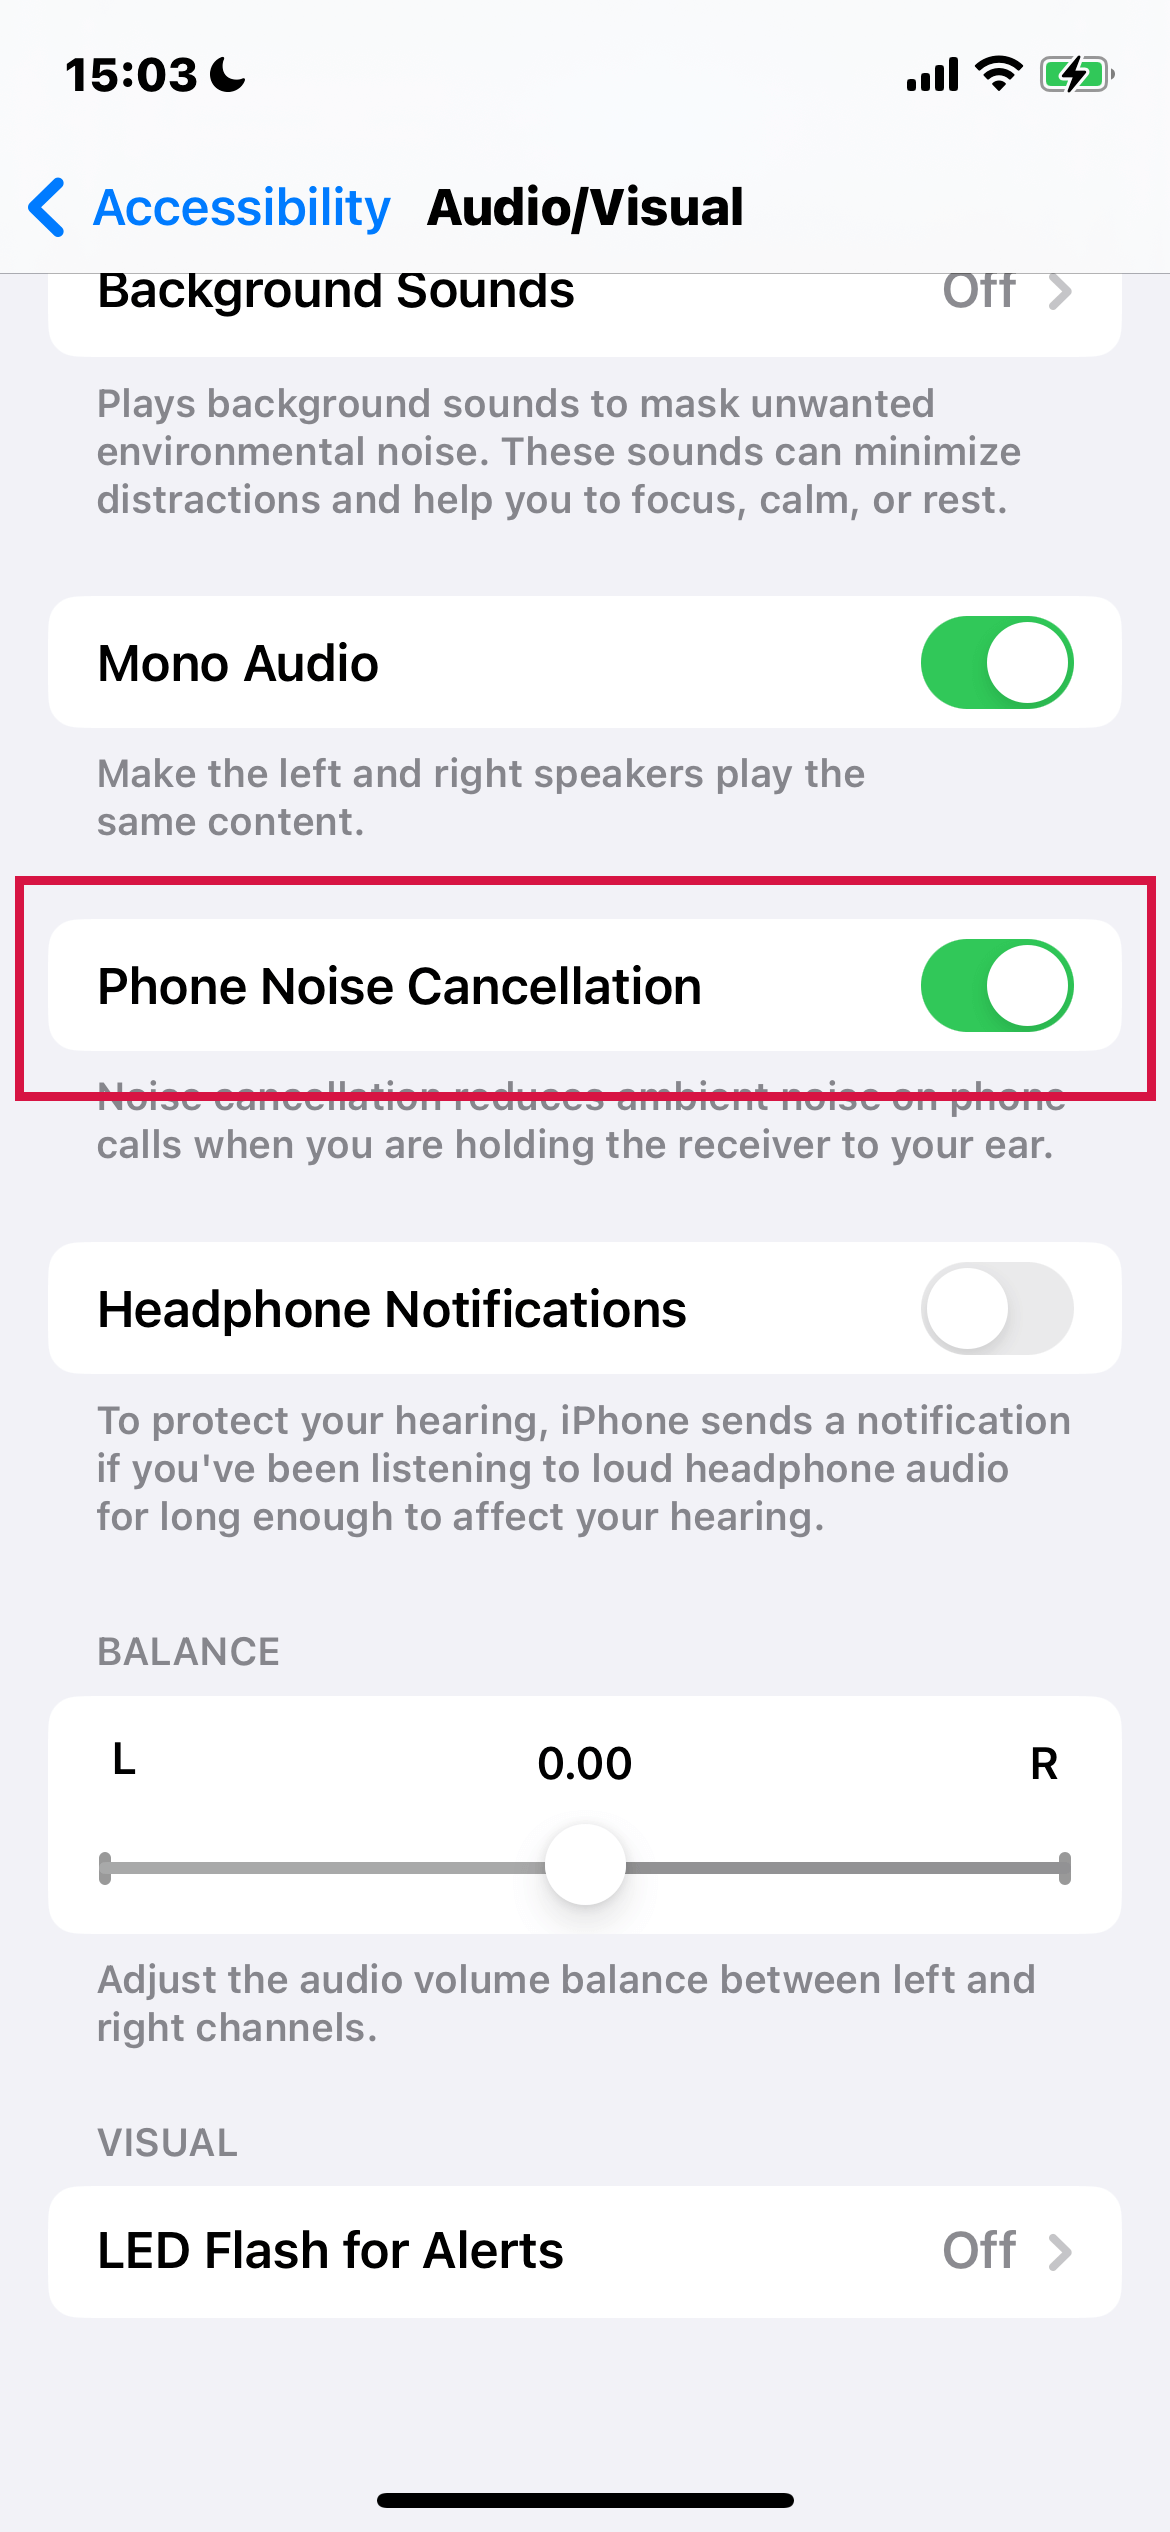 Iphone Accessibility Audio And Visual Phone Noise Cancellation On